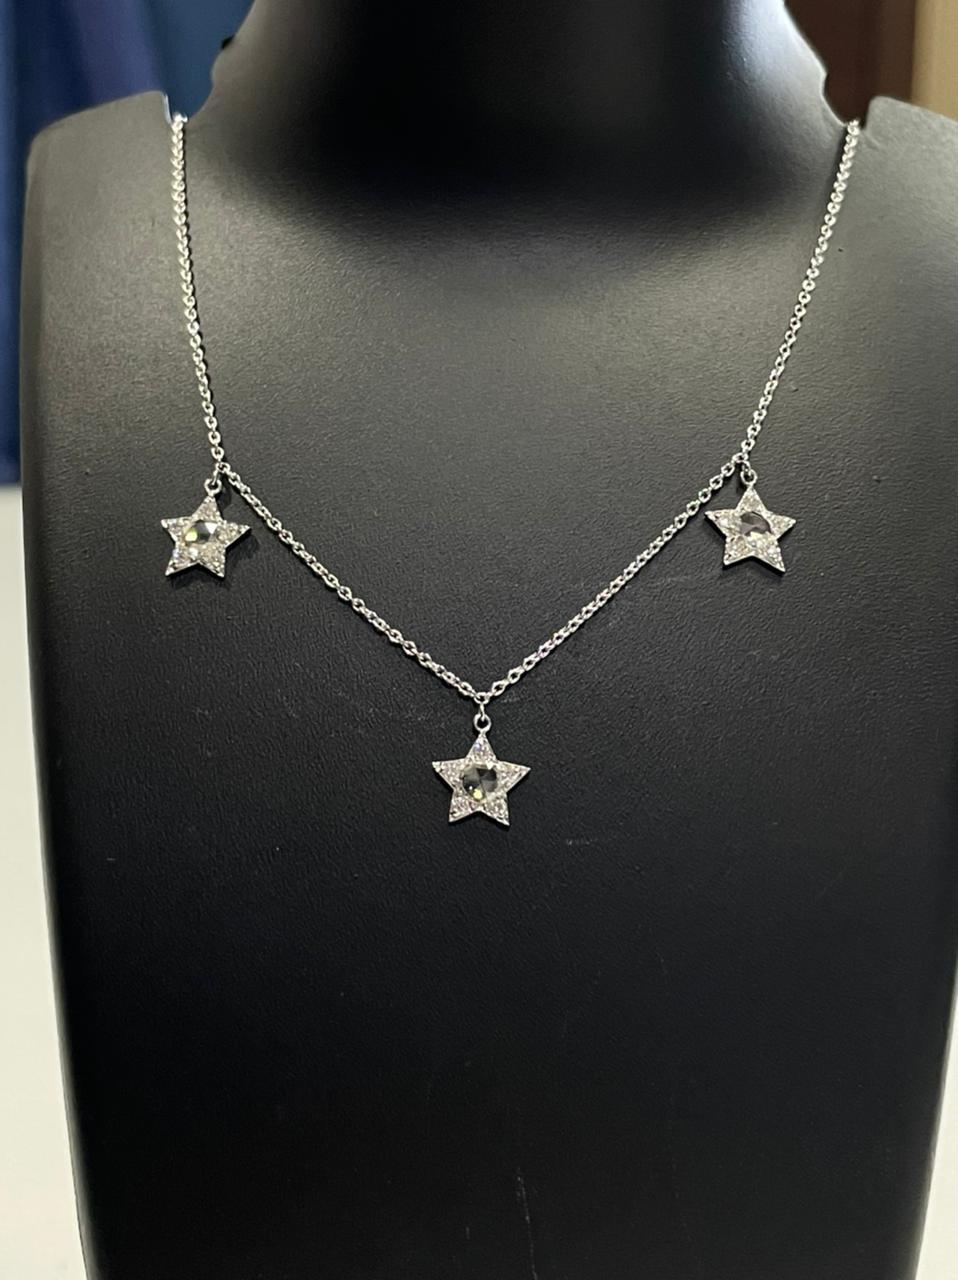 PANIM Rose Cut Diamond Star Necklace in 18k White Gold In New Condition For Sale In Tsim Sha Tsui, Hong Kong